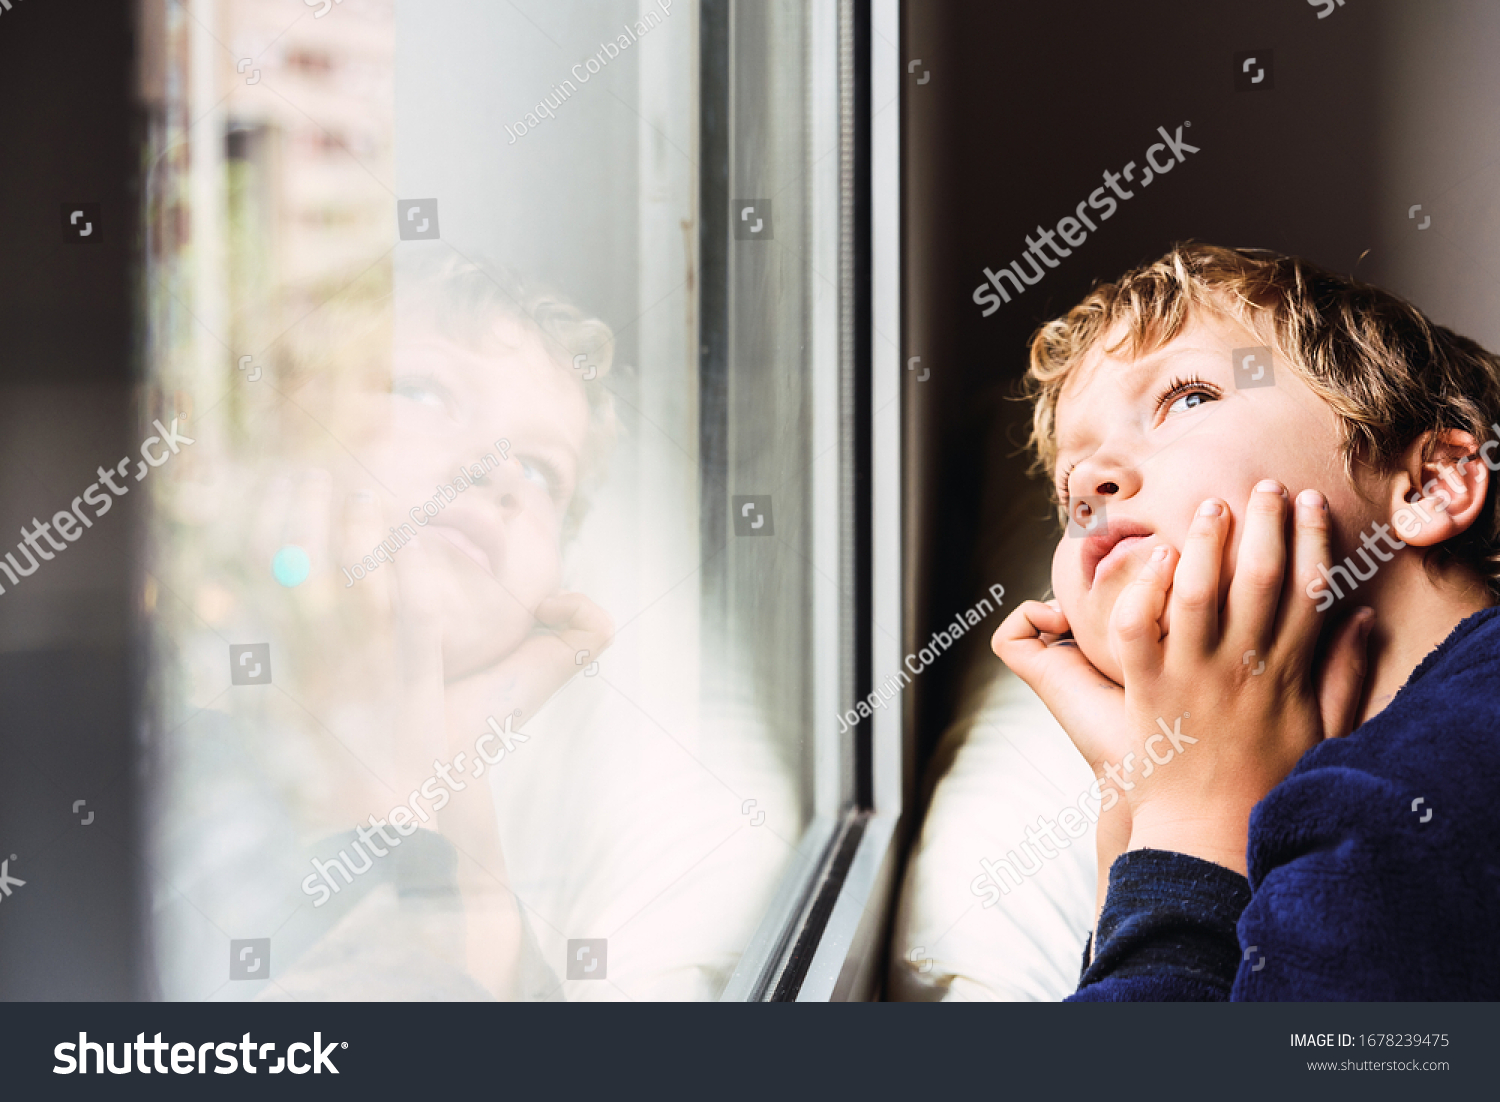 Boy confined at home by the coronavirus crisis in Spain, looks bored out the window without being able to leave home, defocused background. #1678239475